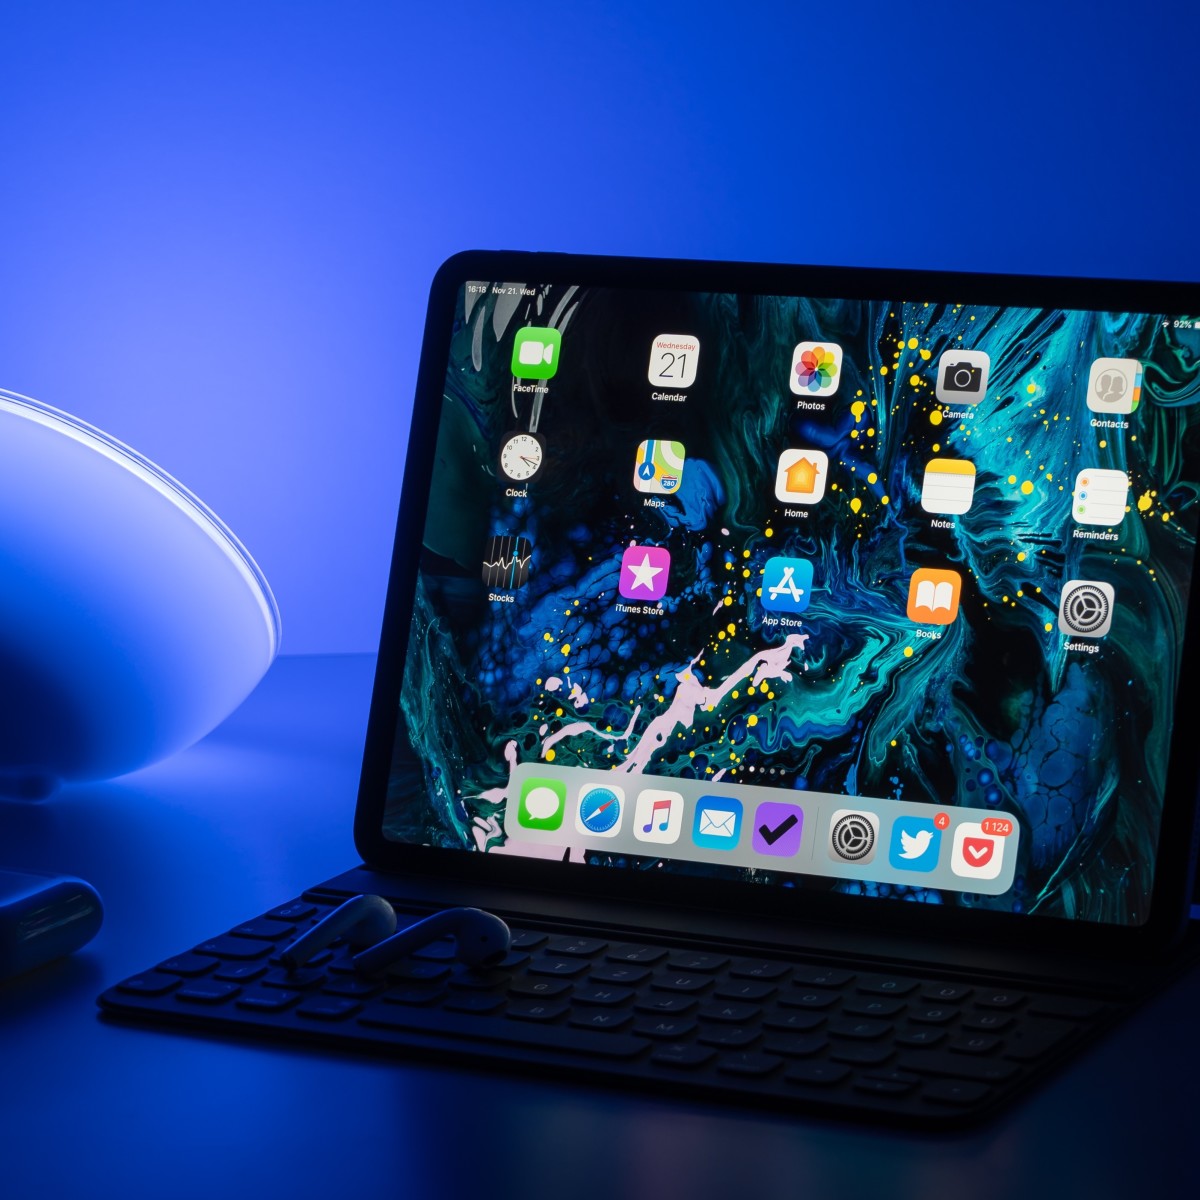 Is an iPad Pro really worth the price? 